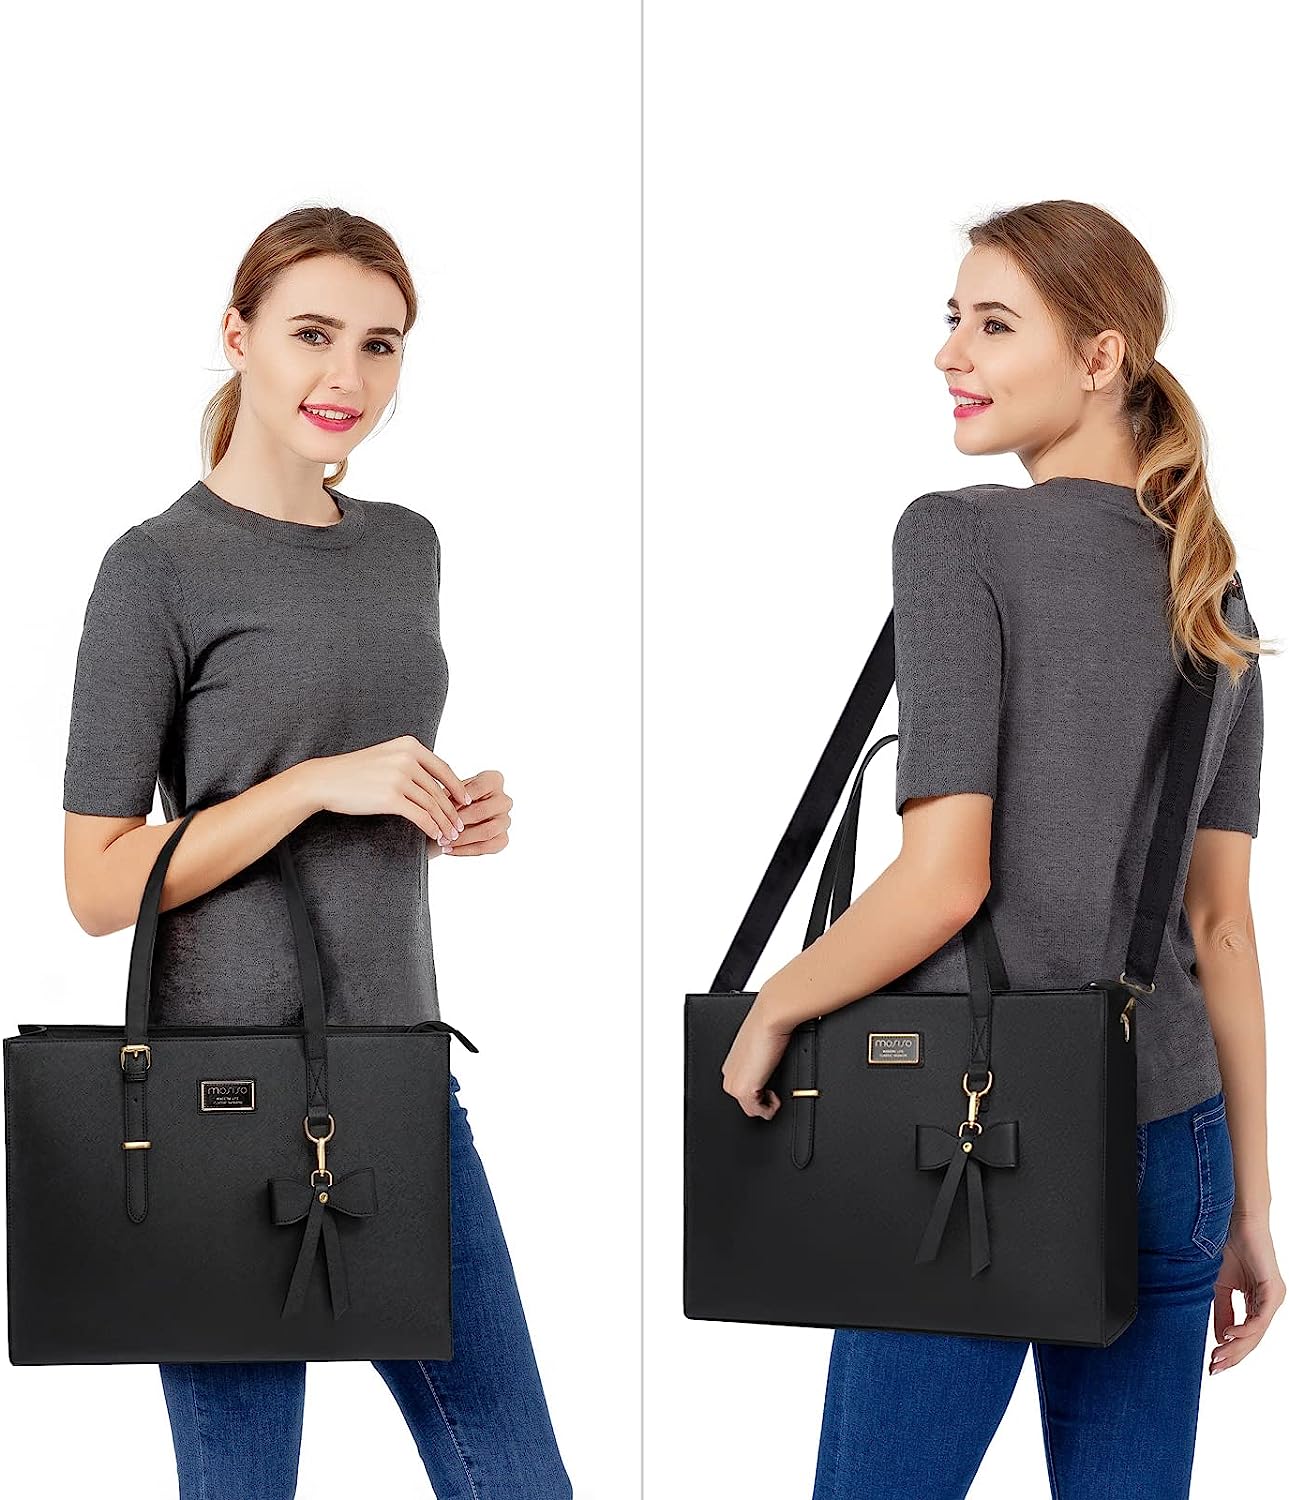 Laptop Bags for men and women | DailyObjects